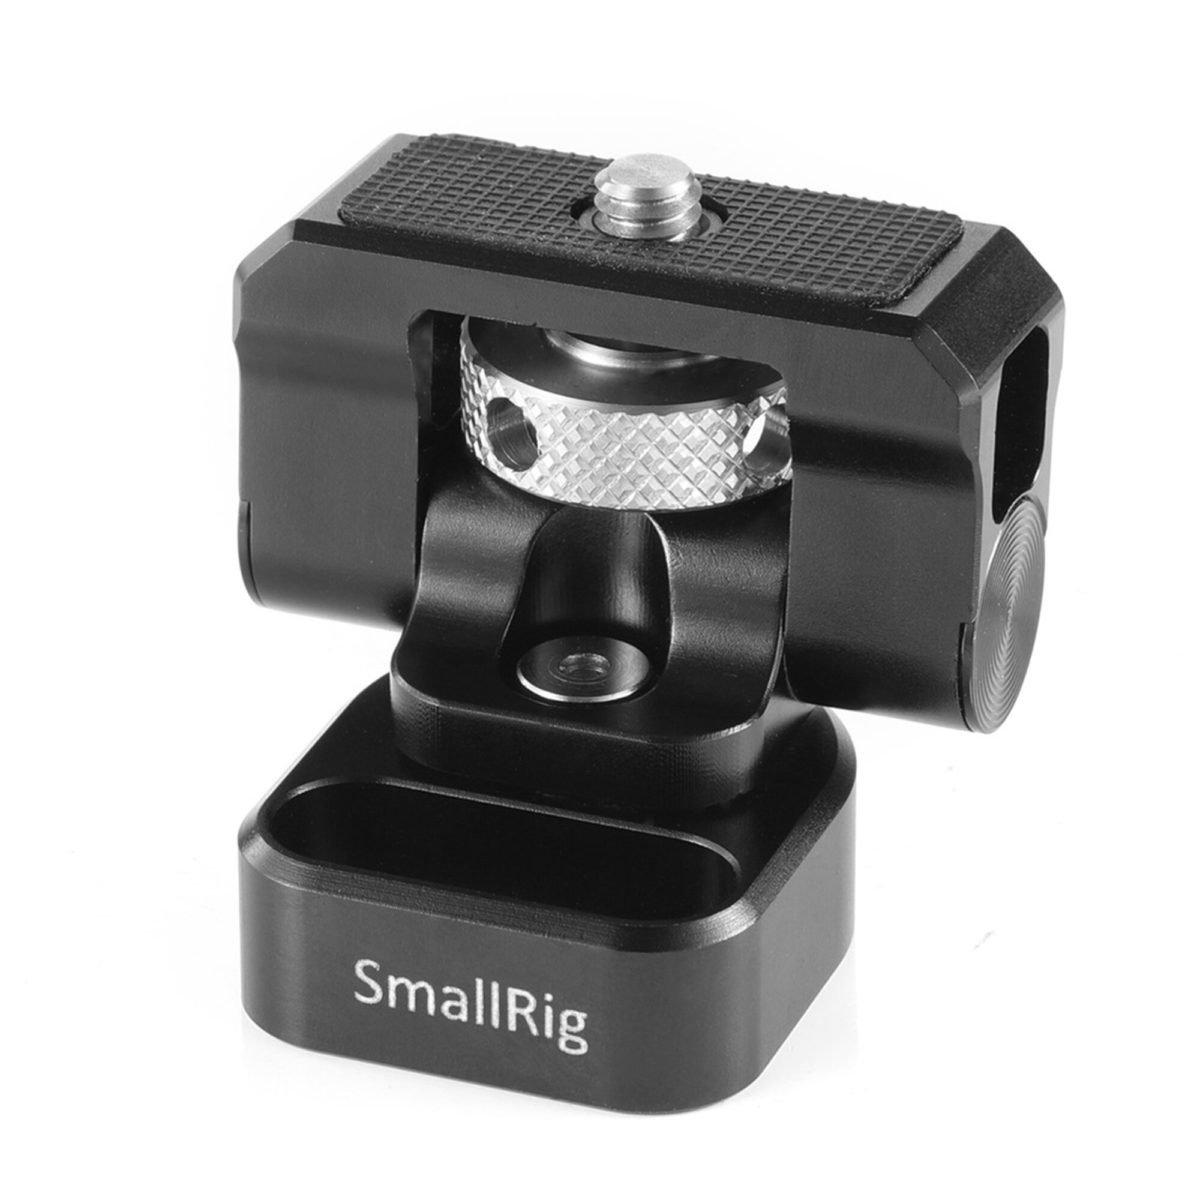 SmallRig Swivel and Tilt Monitor Mount BSE2294 mieten ab 0,86 € am Tag.